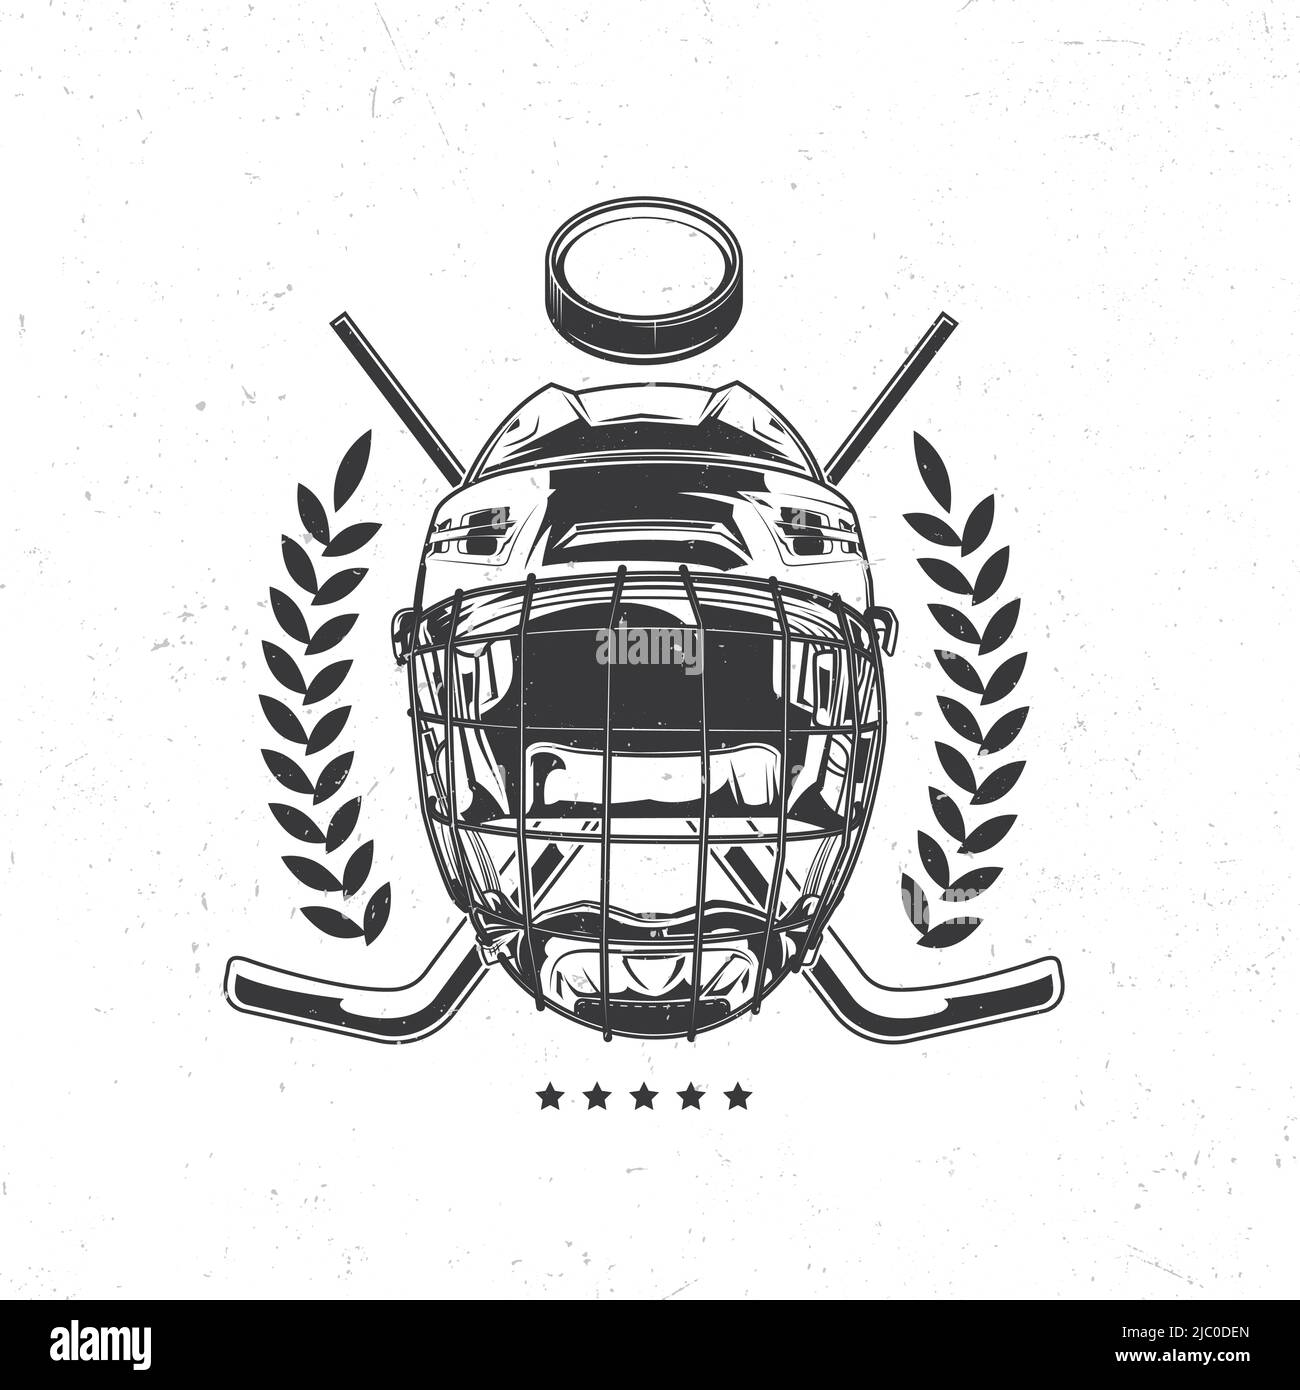 Isolated emblem with illustration of hockey mask, hockey sticks and puck Stock Vector